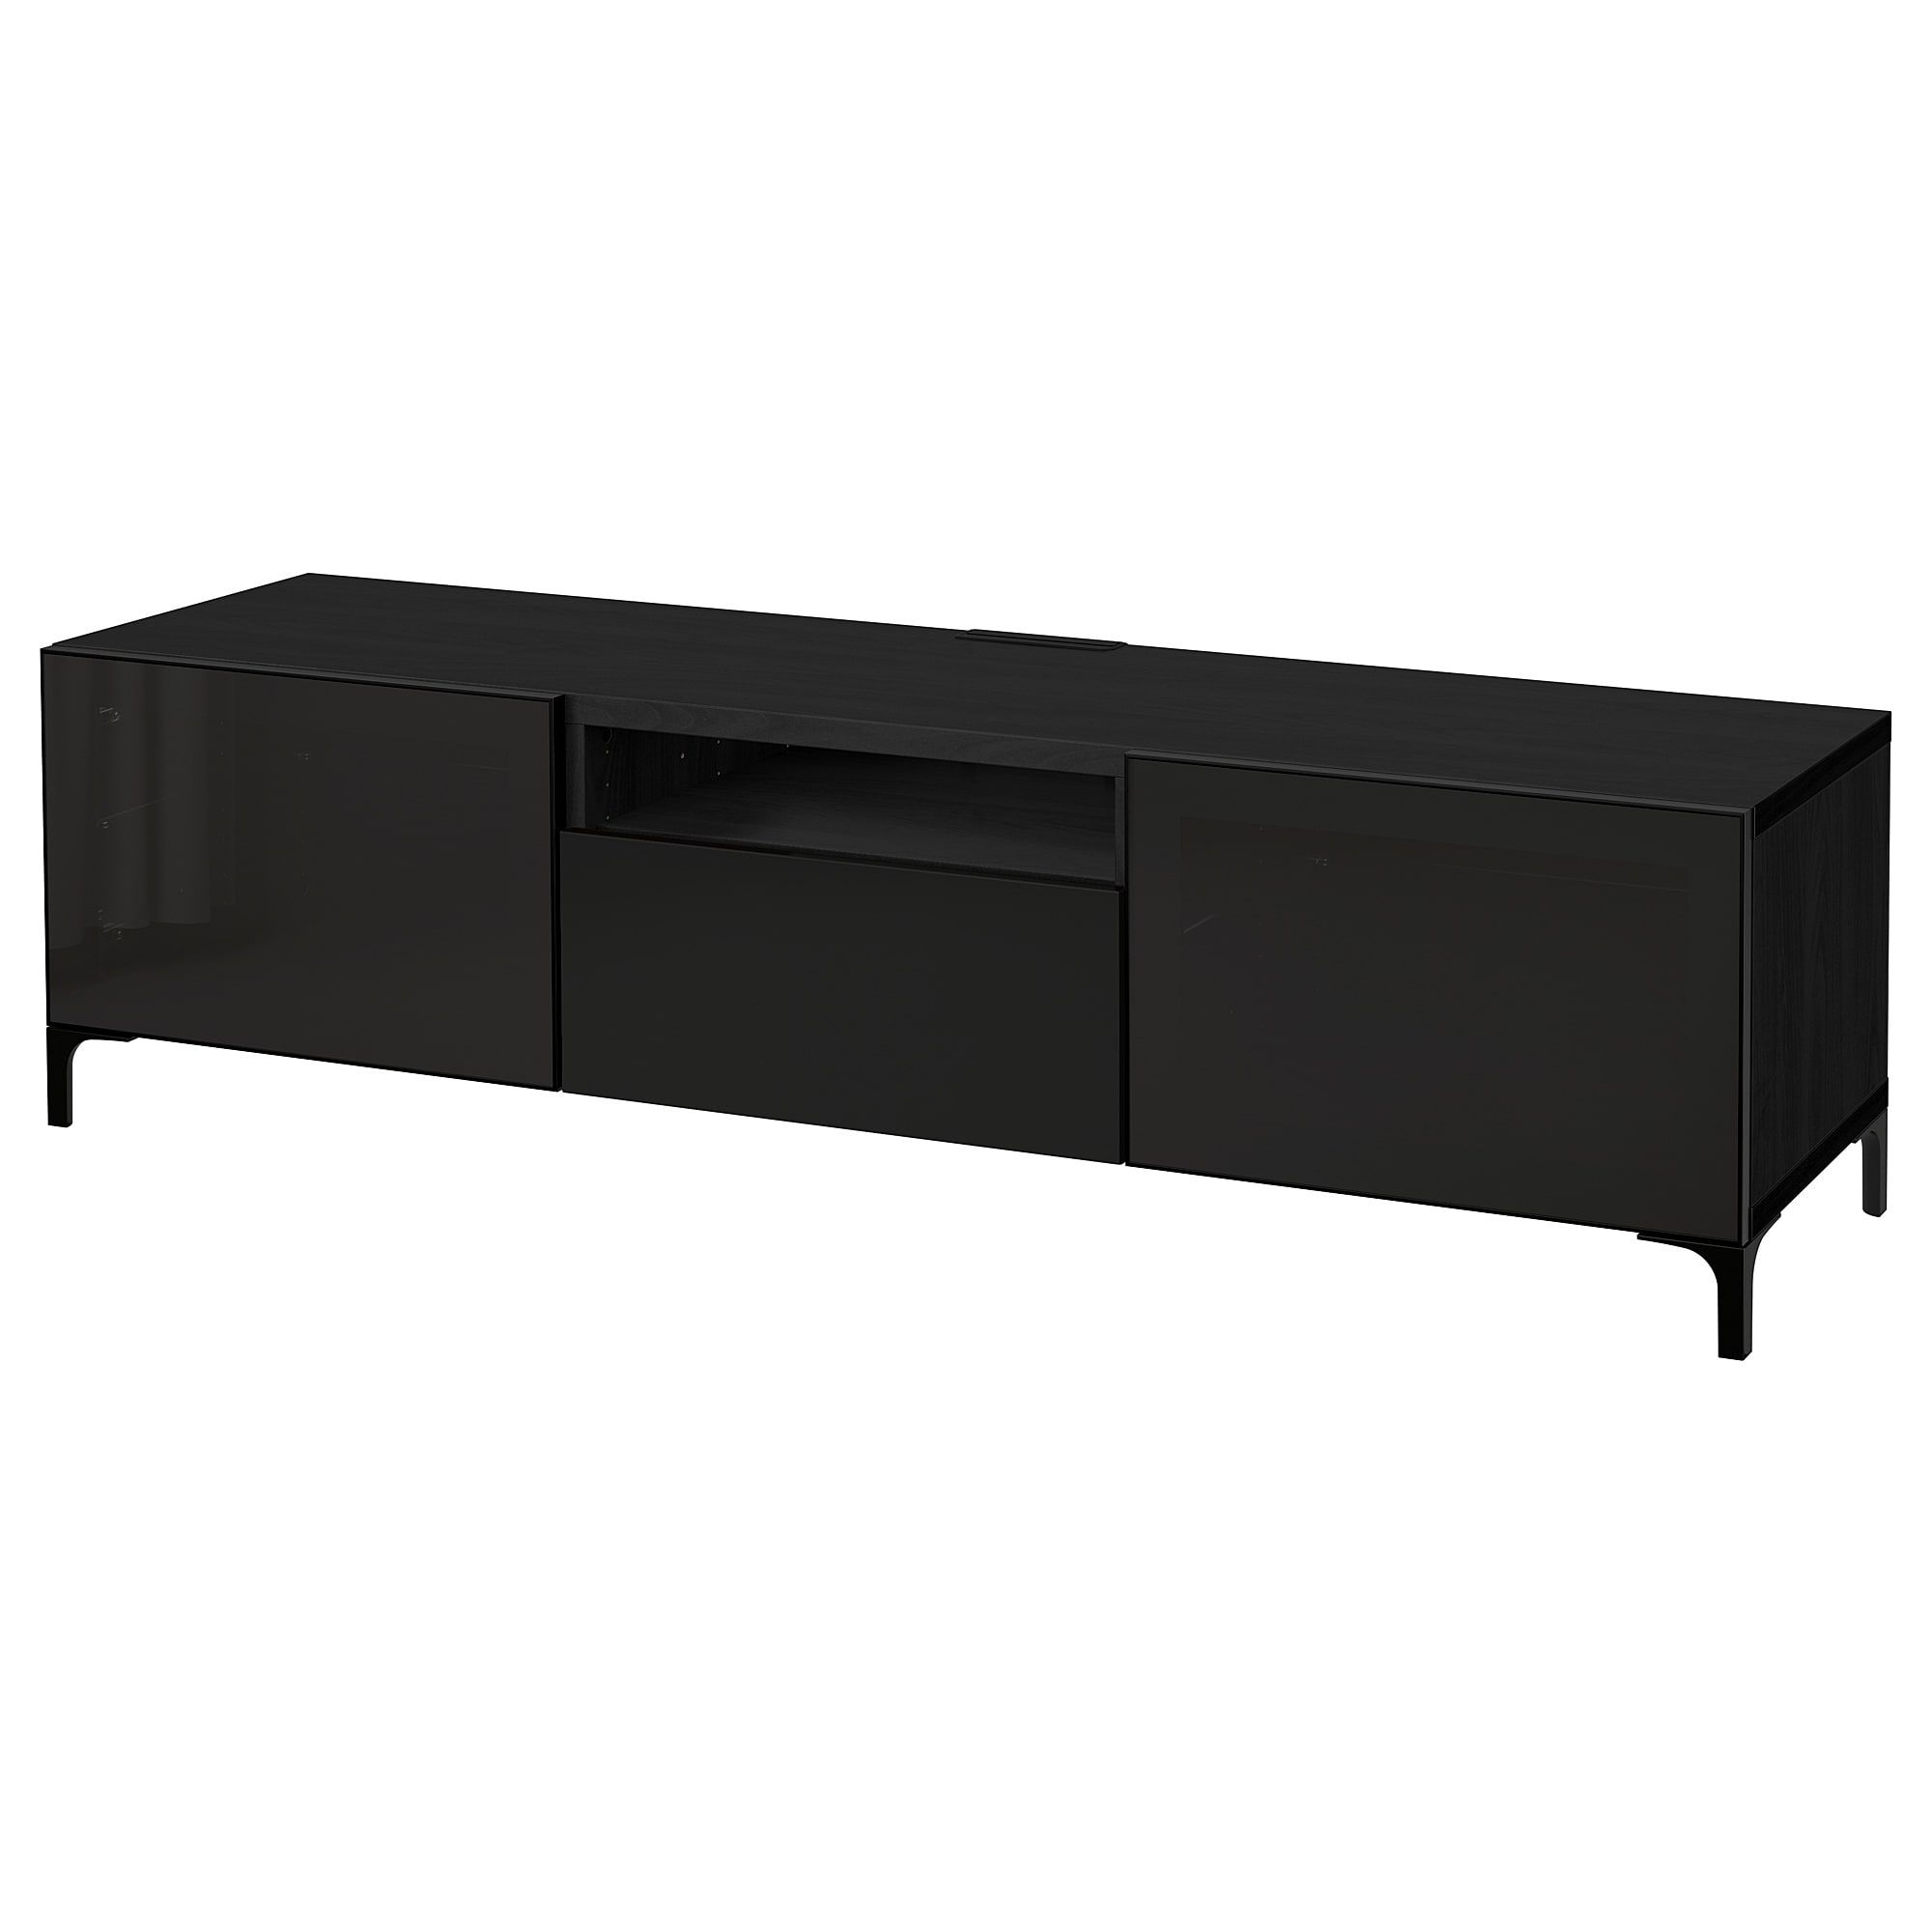 Tv Tables – Tv Benches | Ikea Throughout Valencia 70 Inch Tv Stands (View 30 of 30)